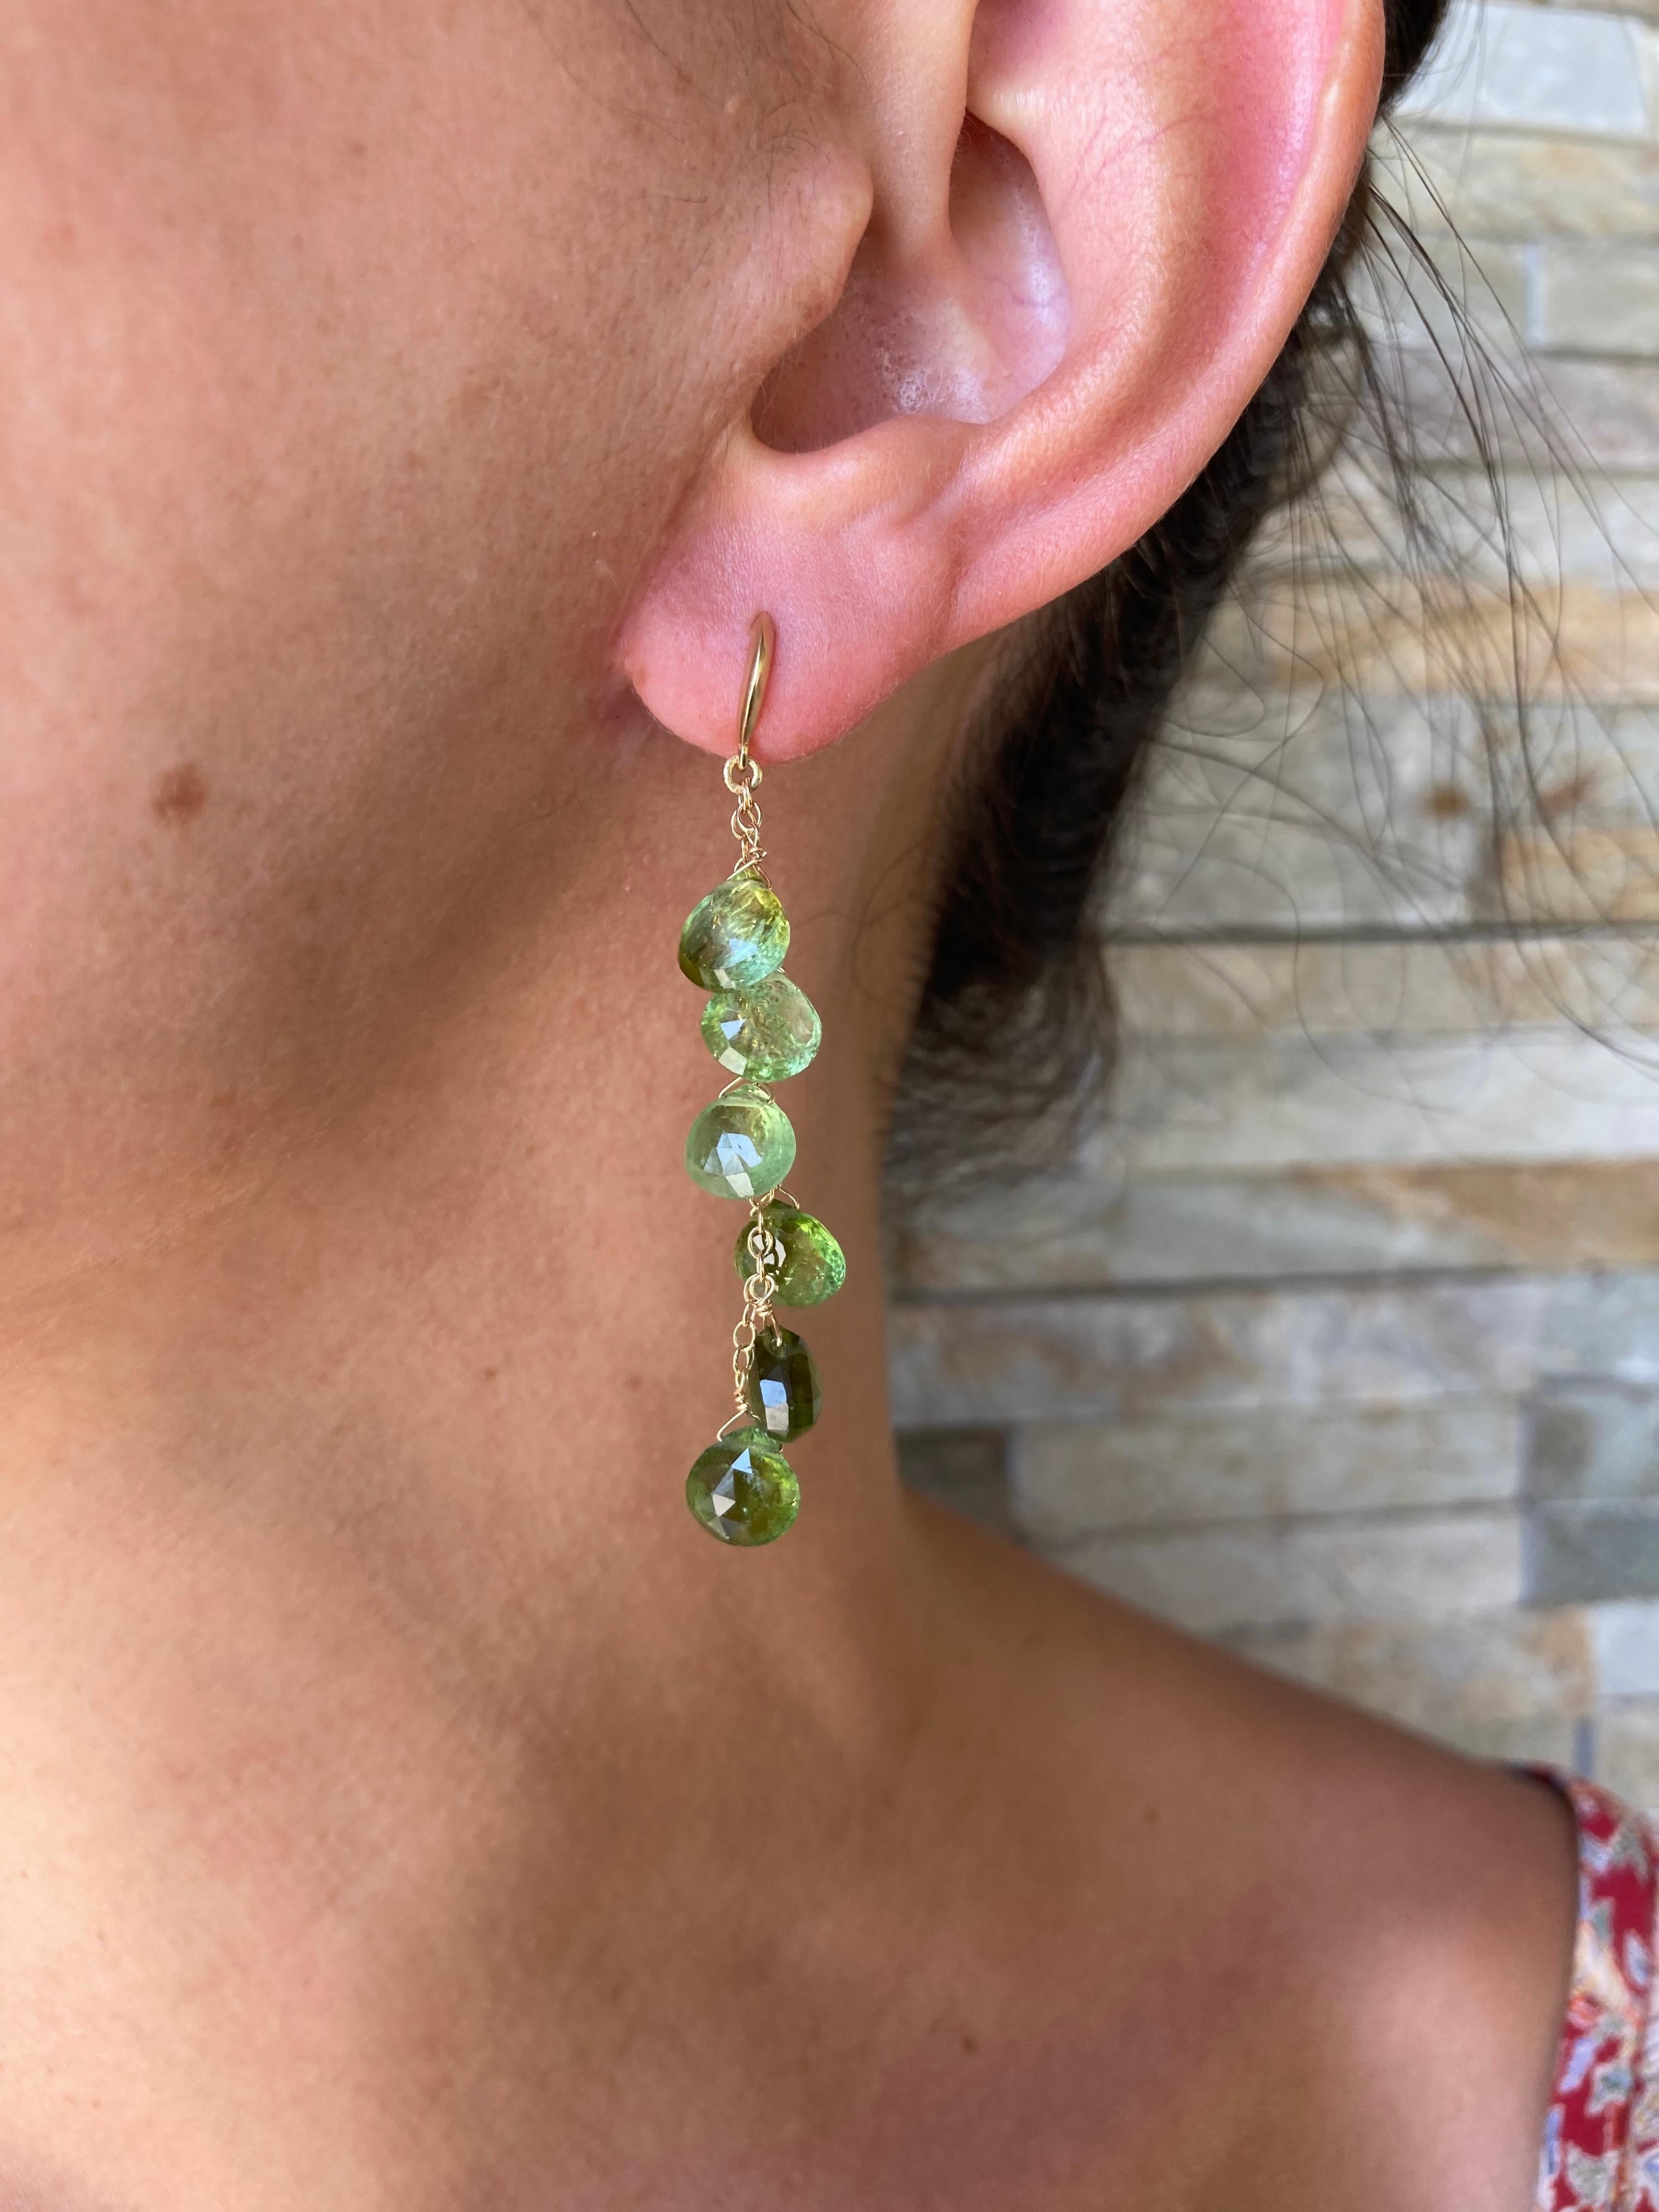 These Gems have been carefully selected to show the Green Tourmaline gradient. Very light, they won't pull on the ear lobe.